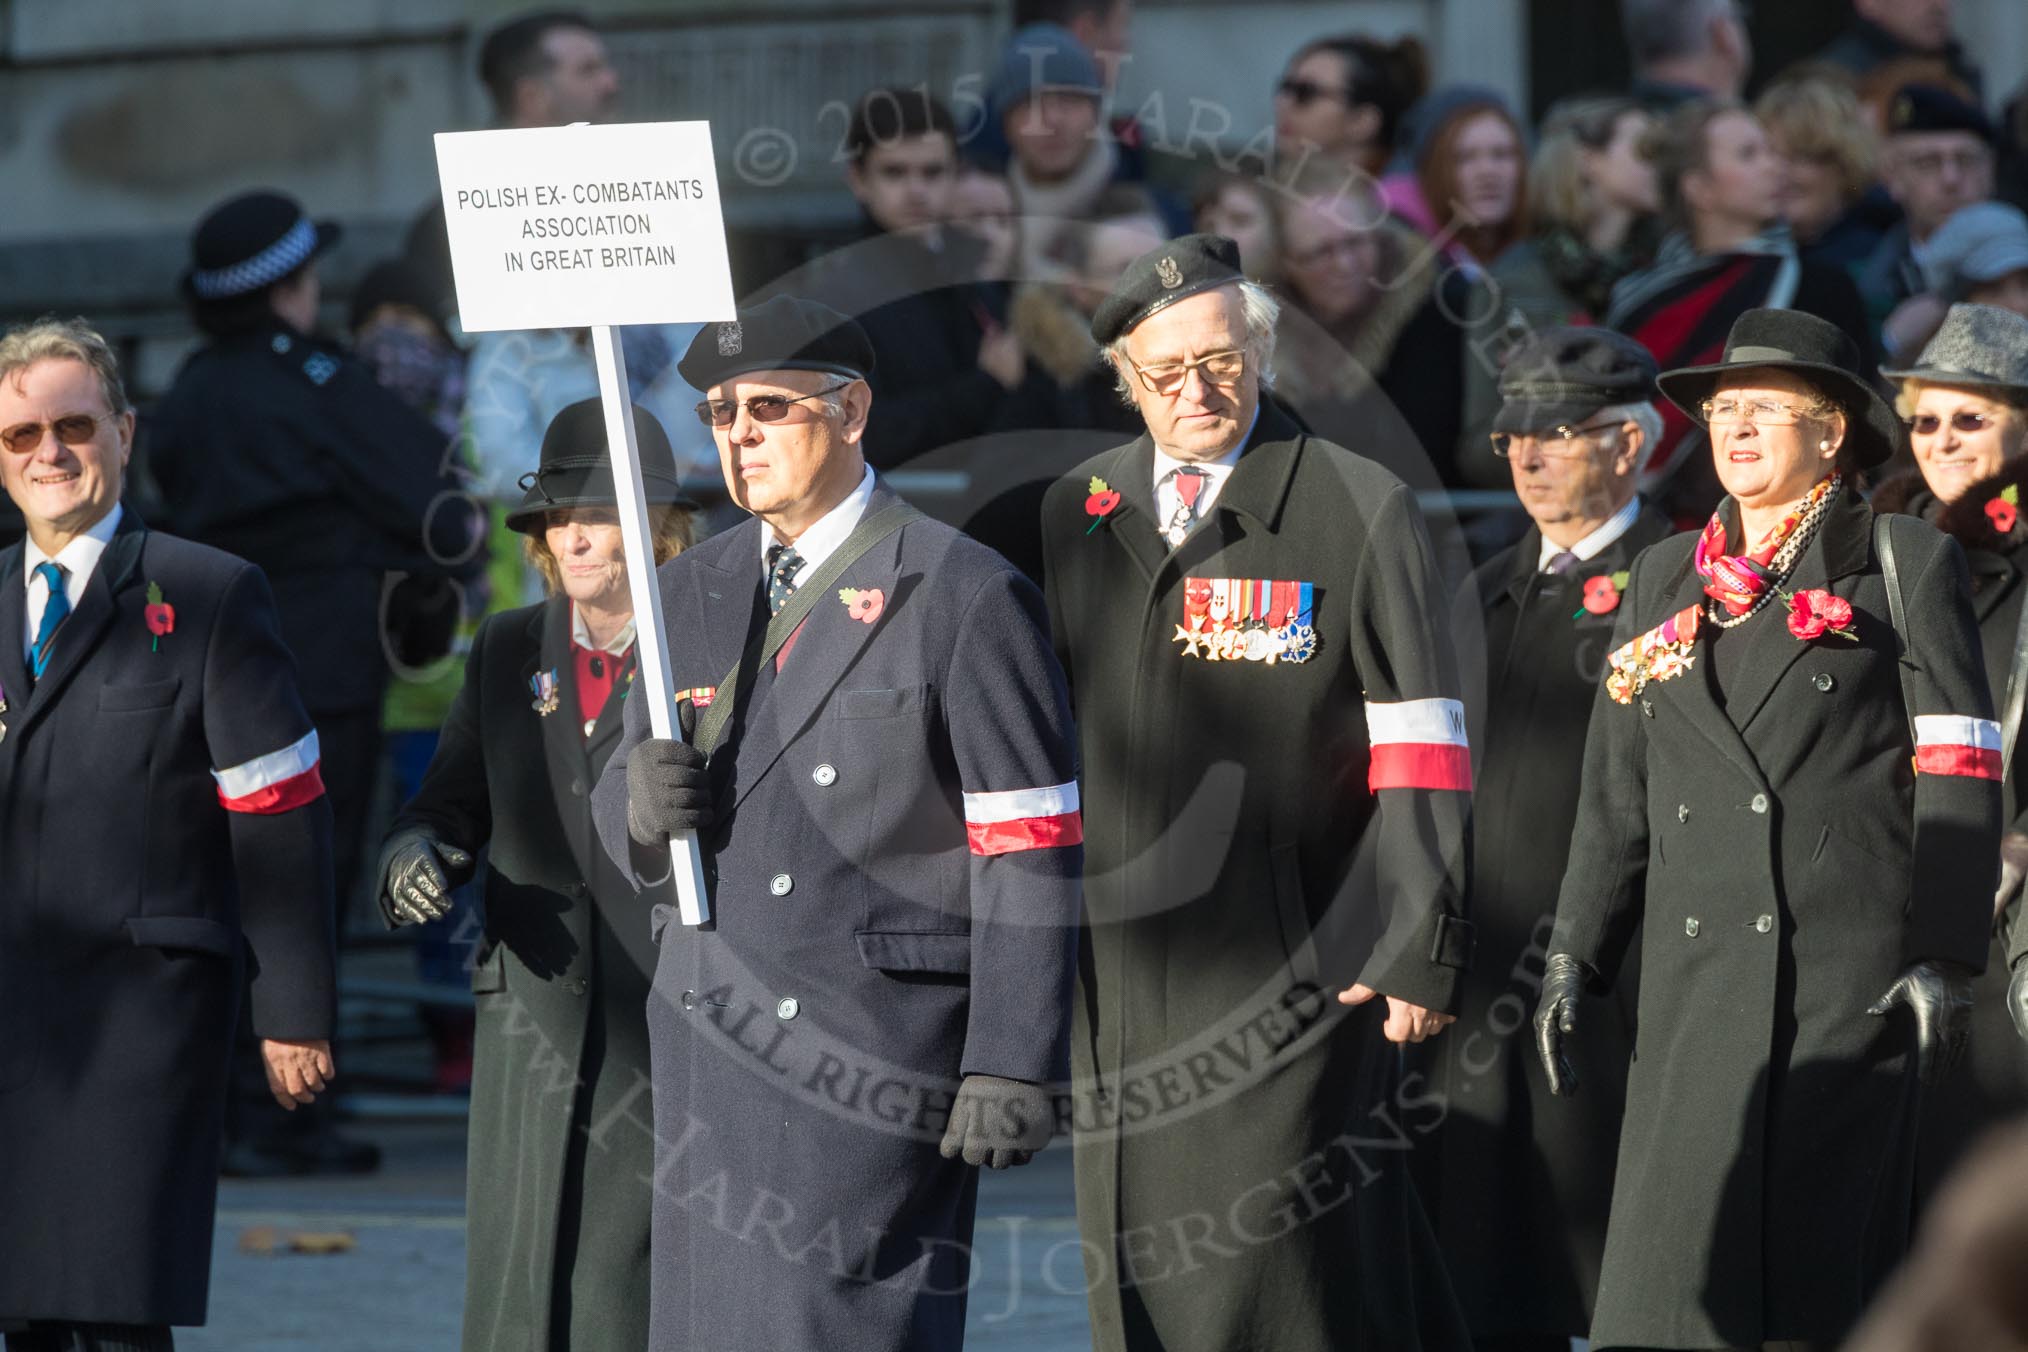 March Past, Remembrance Sunday at the Cenotaph 2016: M42 SPPW - Friends of Polish Veterans Association.
Cenotaph, Whitehall, London SW1,
London,
Greater London,
United Kingdom,
on 13 November 2016 at 13:19, image #2965